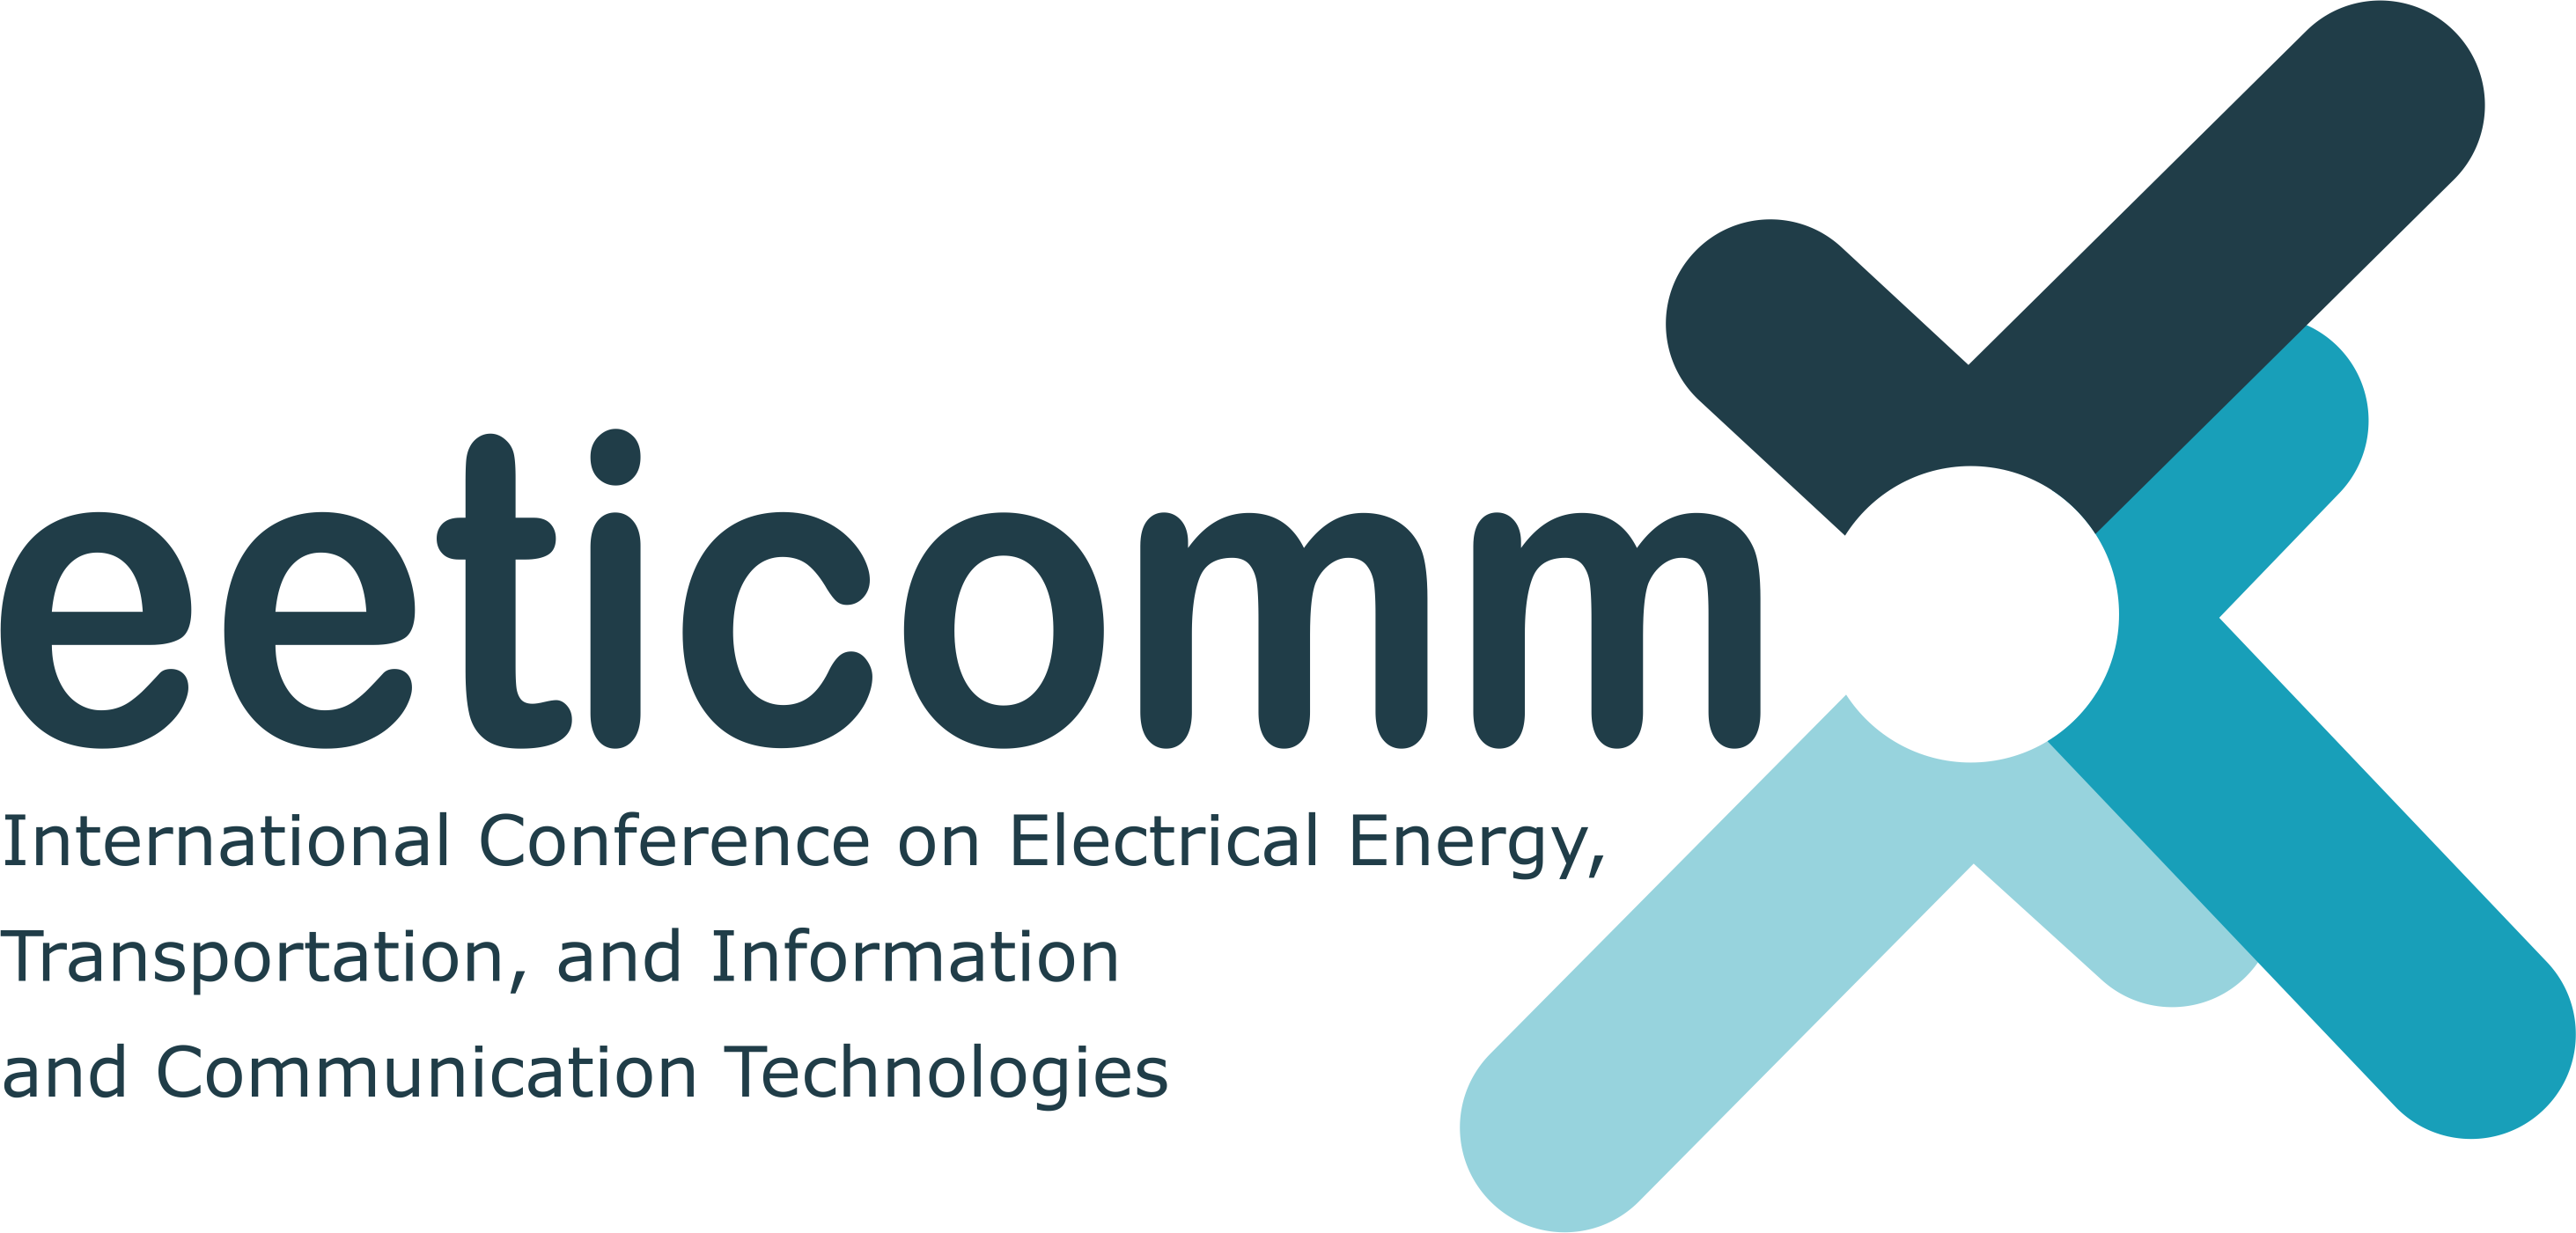 International Conference on Electrical Energy, Transportation, Information and Communication Technologies EETICOMM